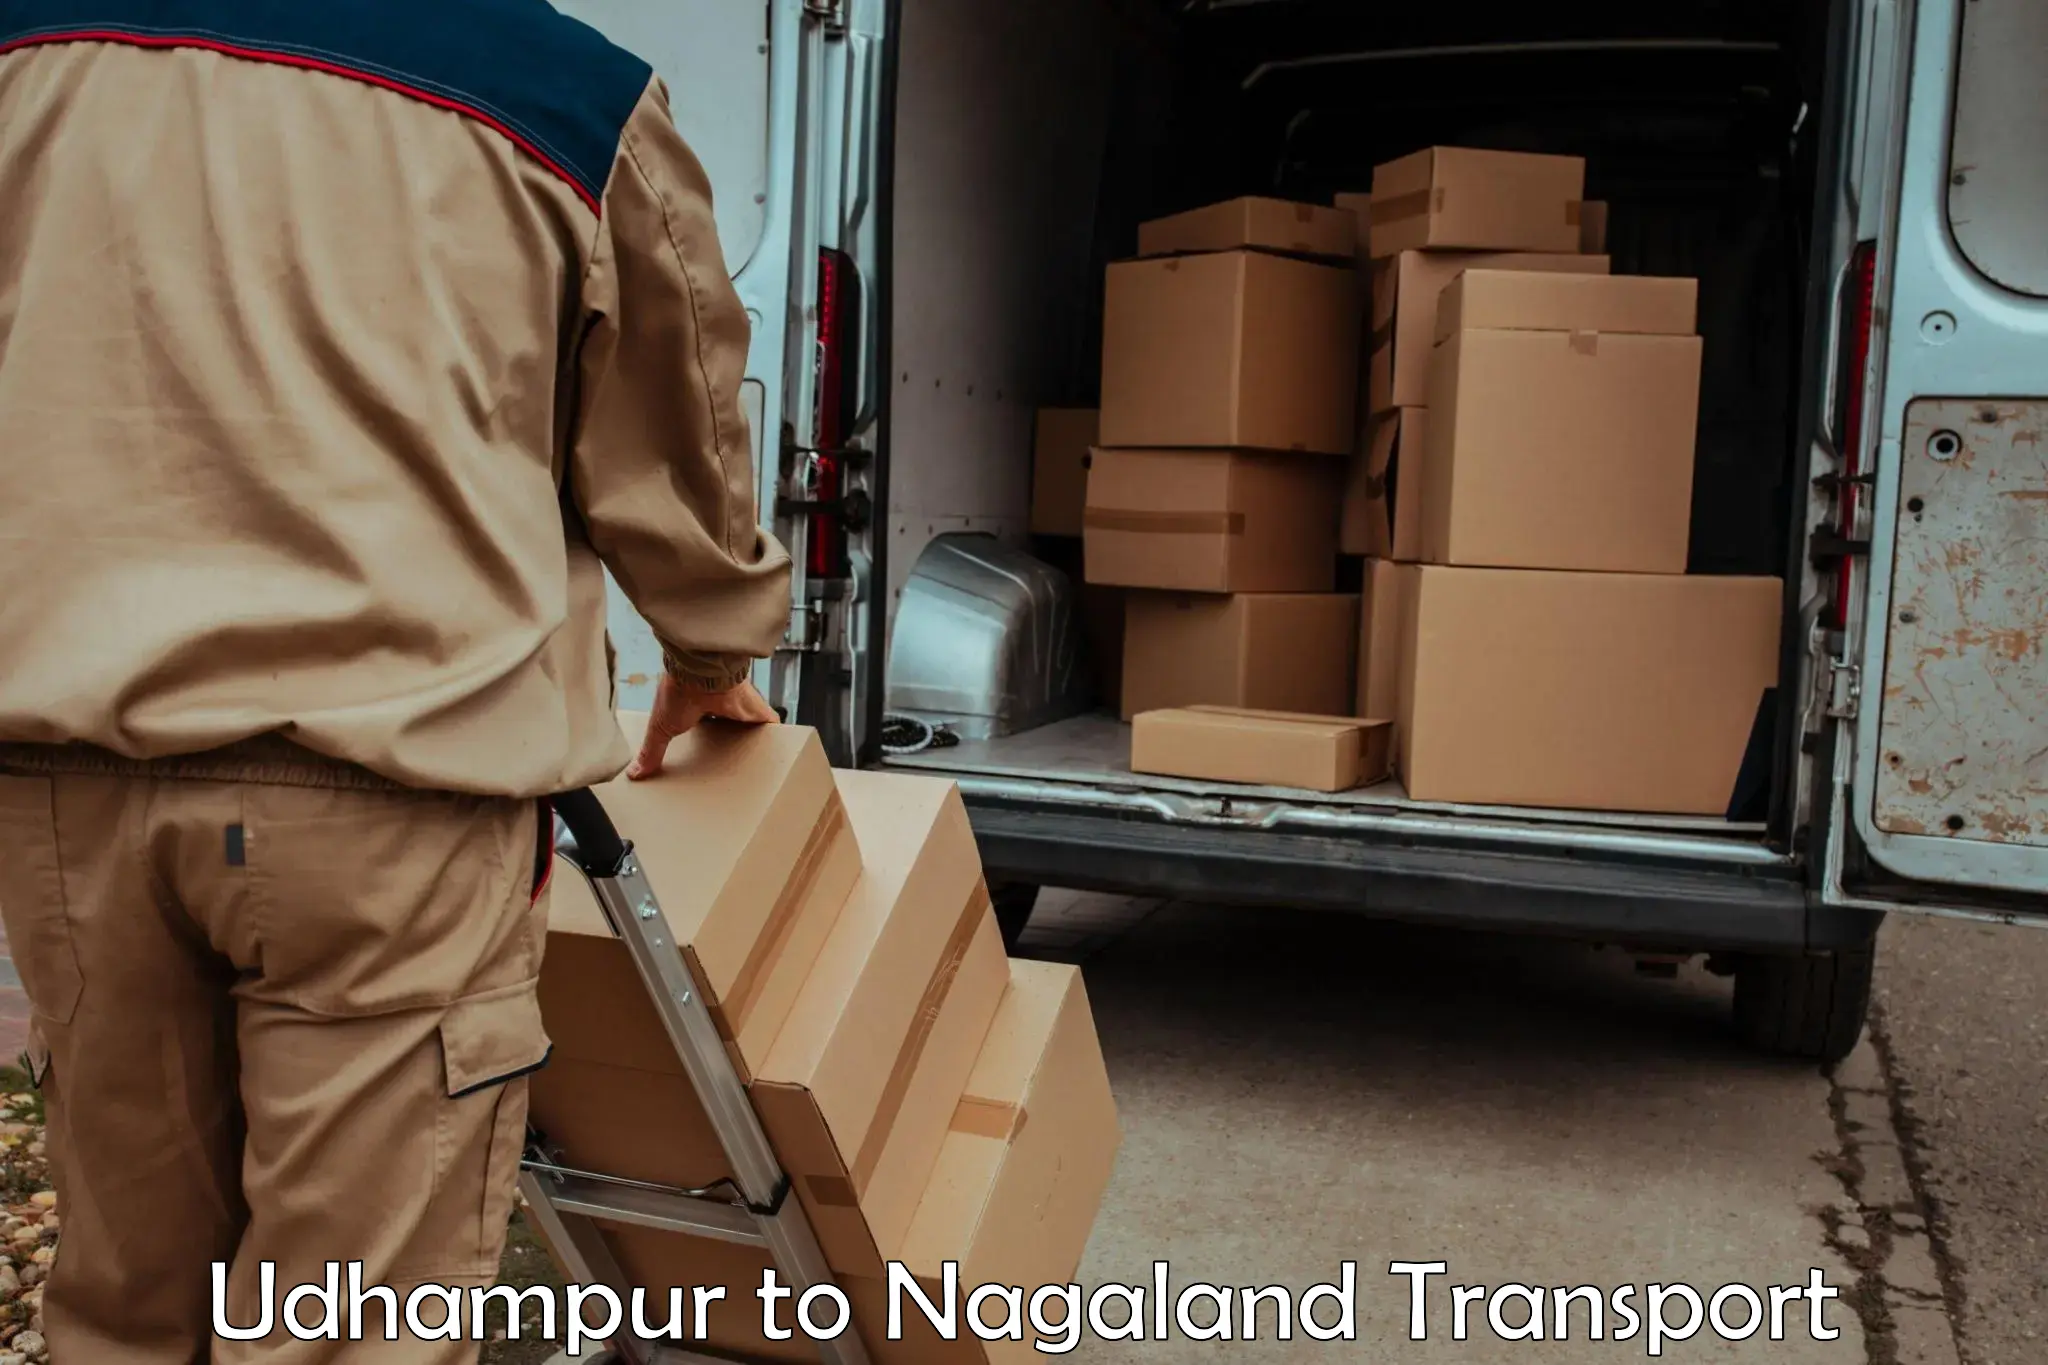 Furniture transport service in Udhampur to Nagaland